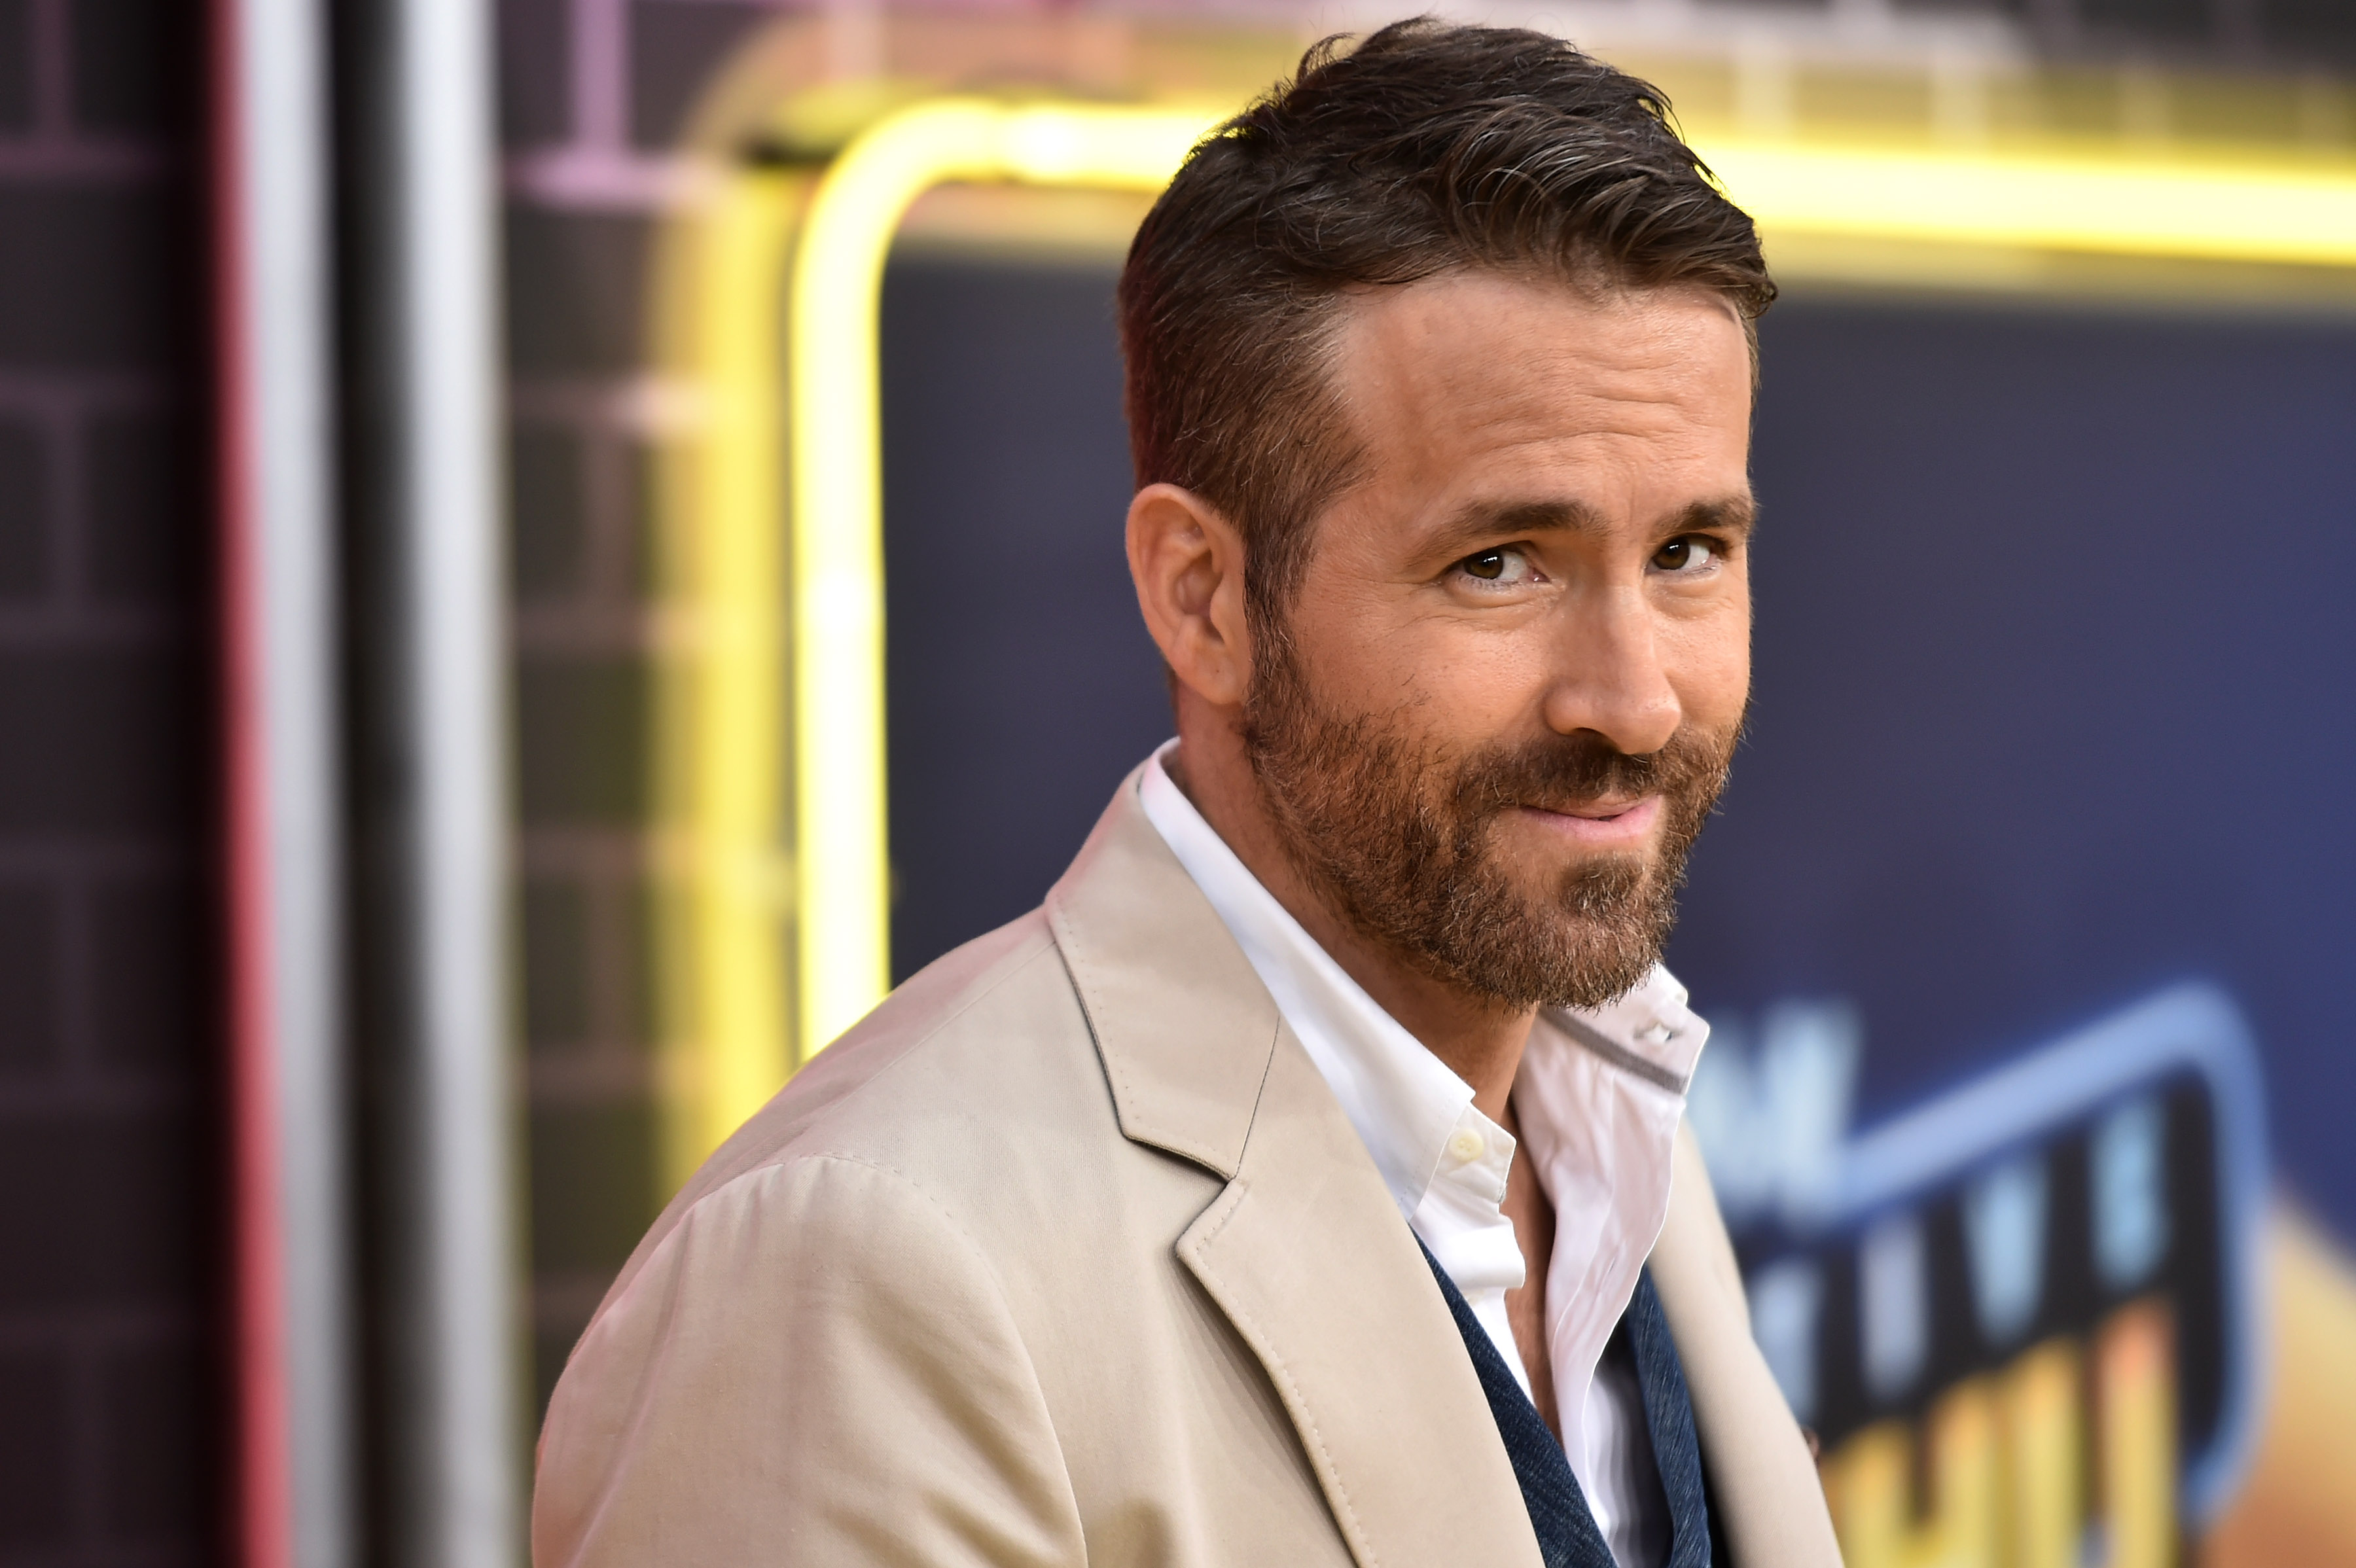 Ryan Reynolds attends the premiere of "Pokemon: Detective Pikachu" in Times Square on May 2, 2019 in New York City. (Steven Ferdman—Getty Images)